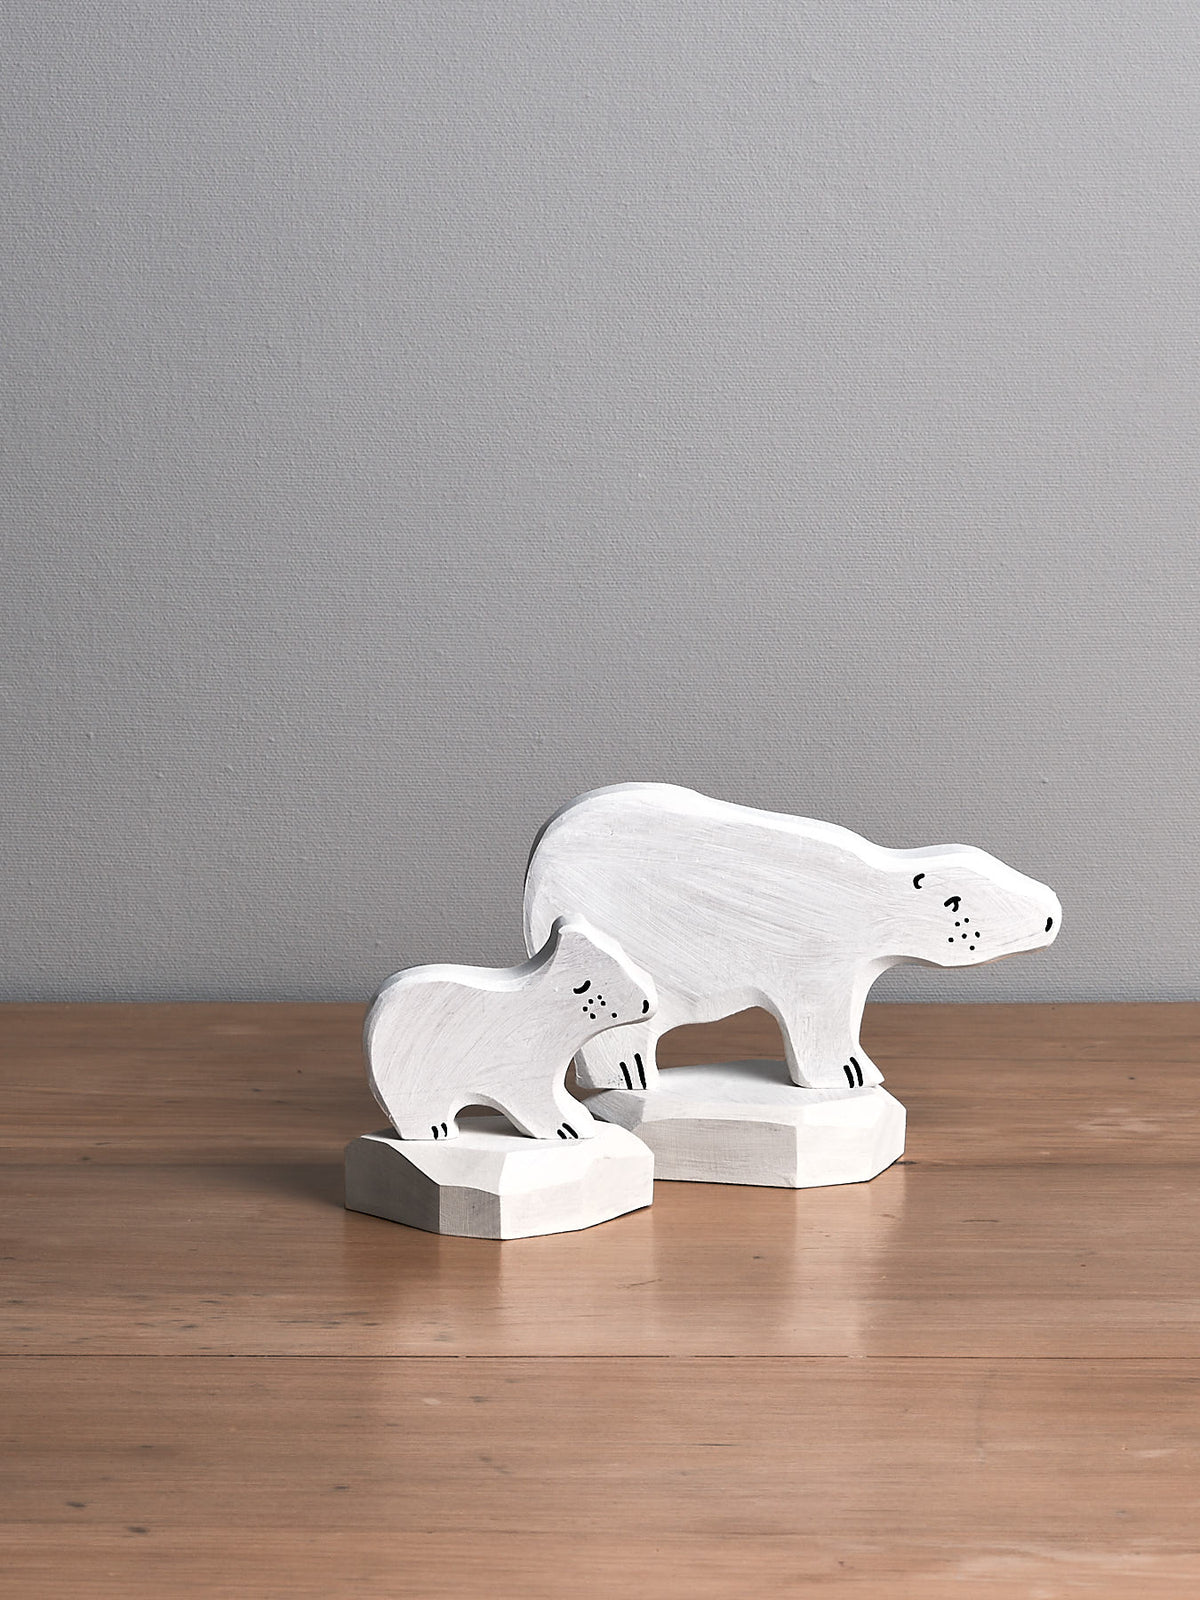 Two wooden Dean&#39;s Workshop polar bear figurines on a wooden table.